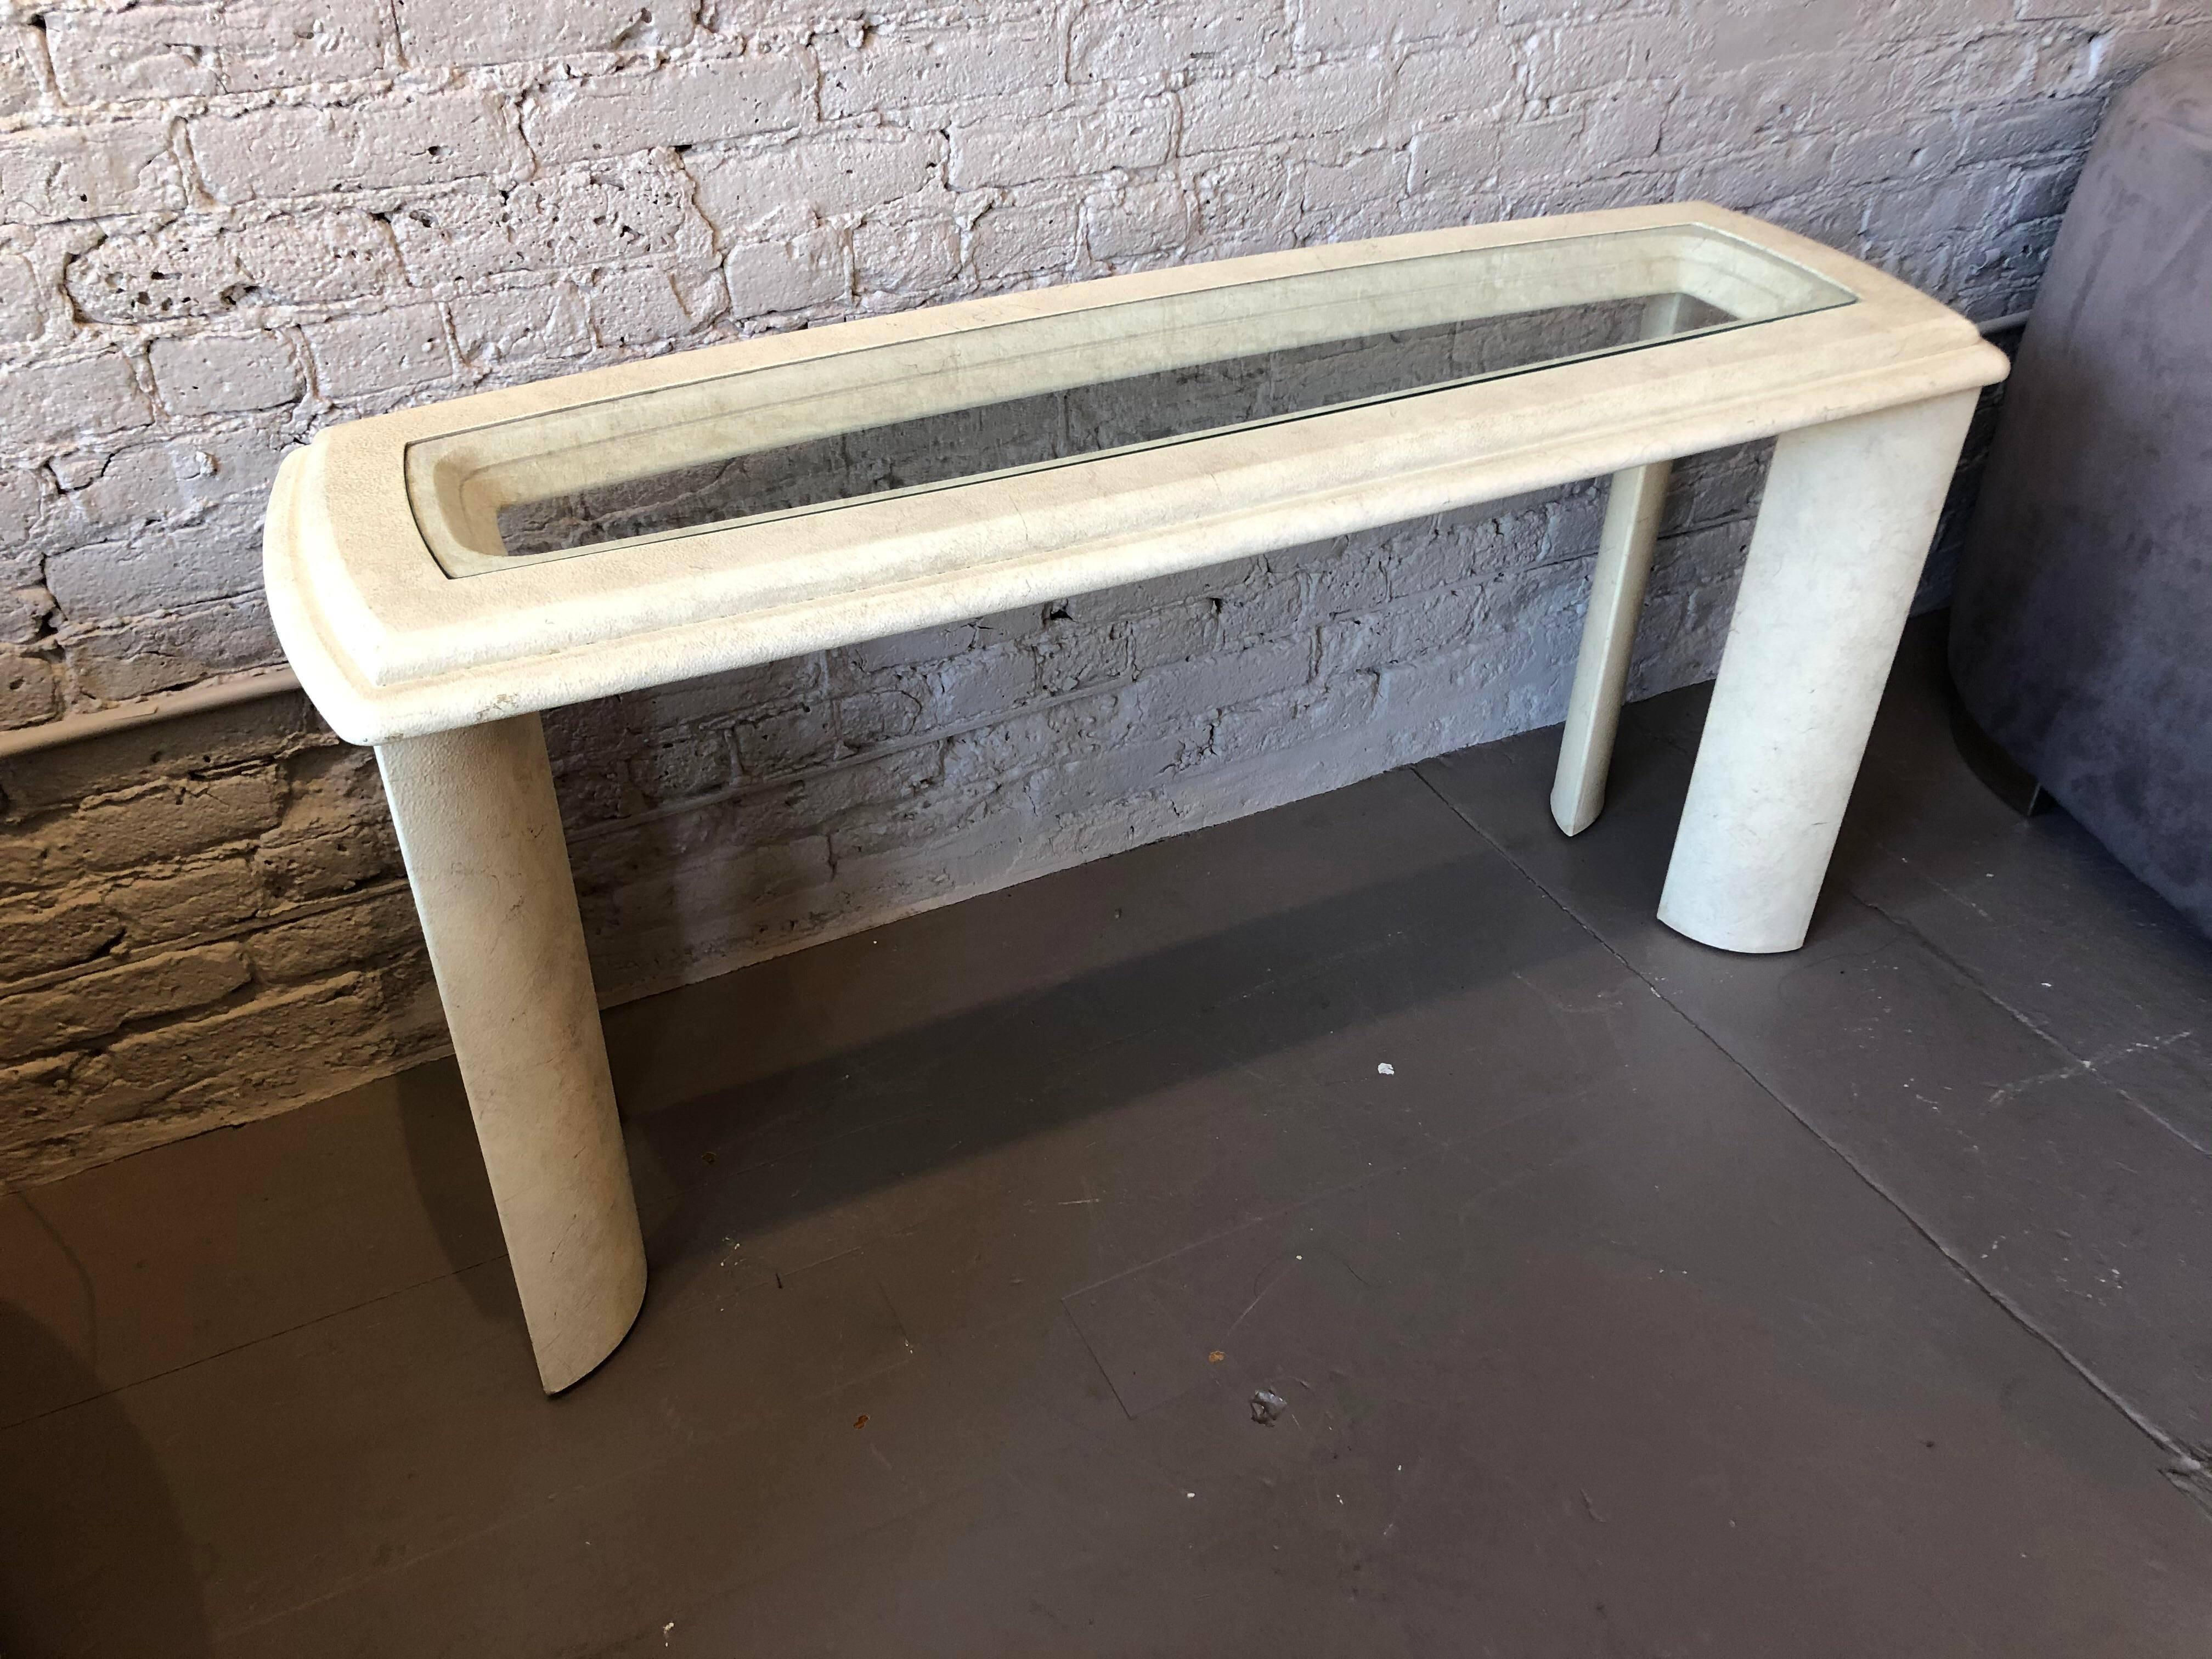 Cool and breezy console table with a glass insert. No chips or cracks and in excellent vintage condition. The interior measurement is 42” (if you want to put a bench/ottoman).

Dimensions: 54